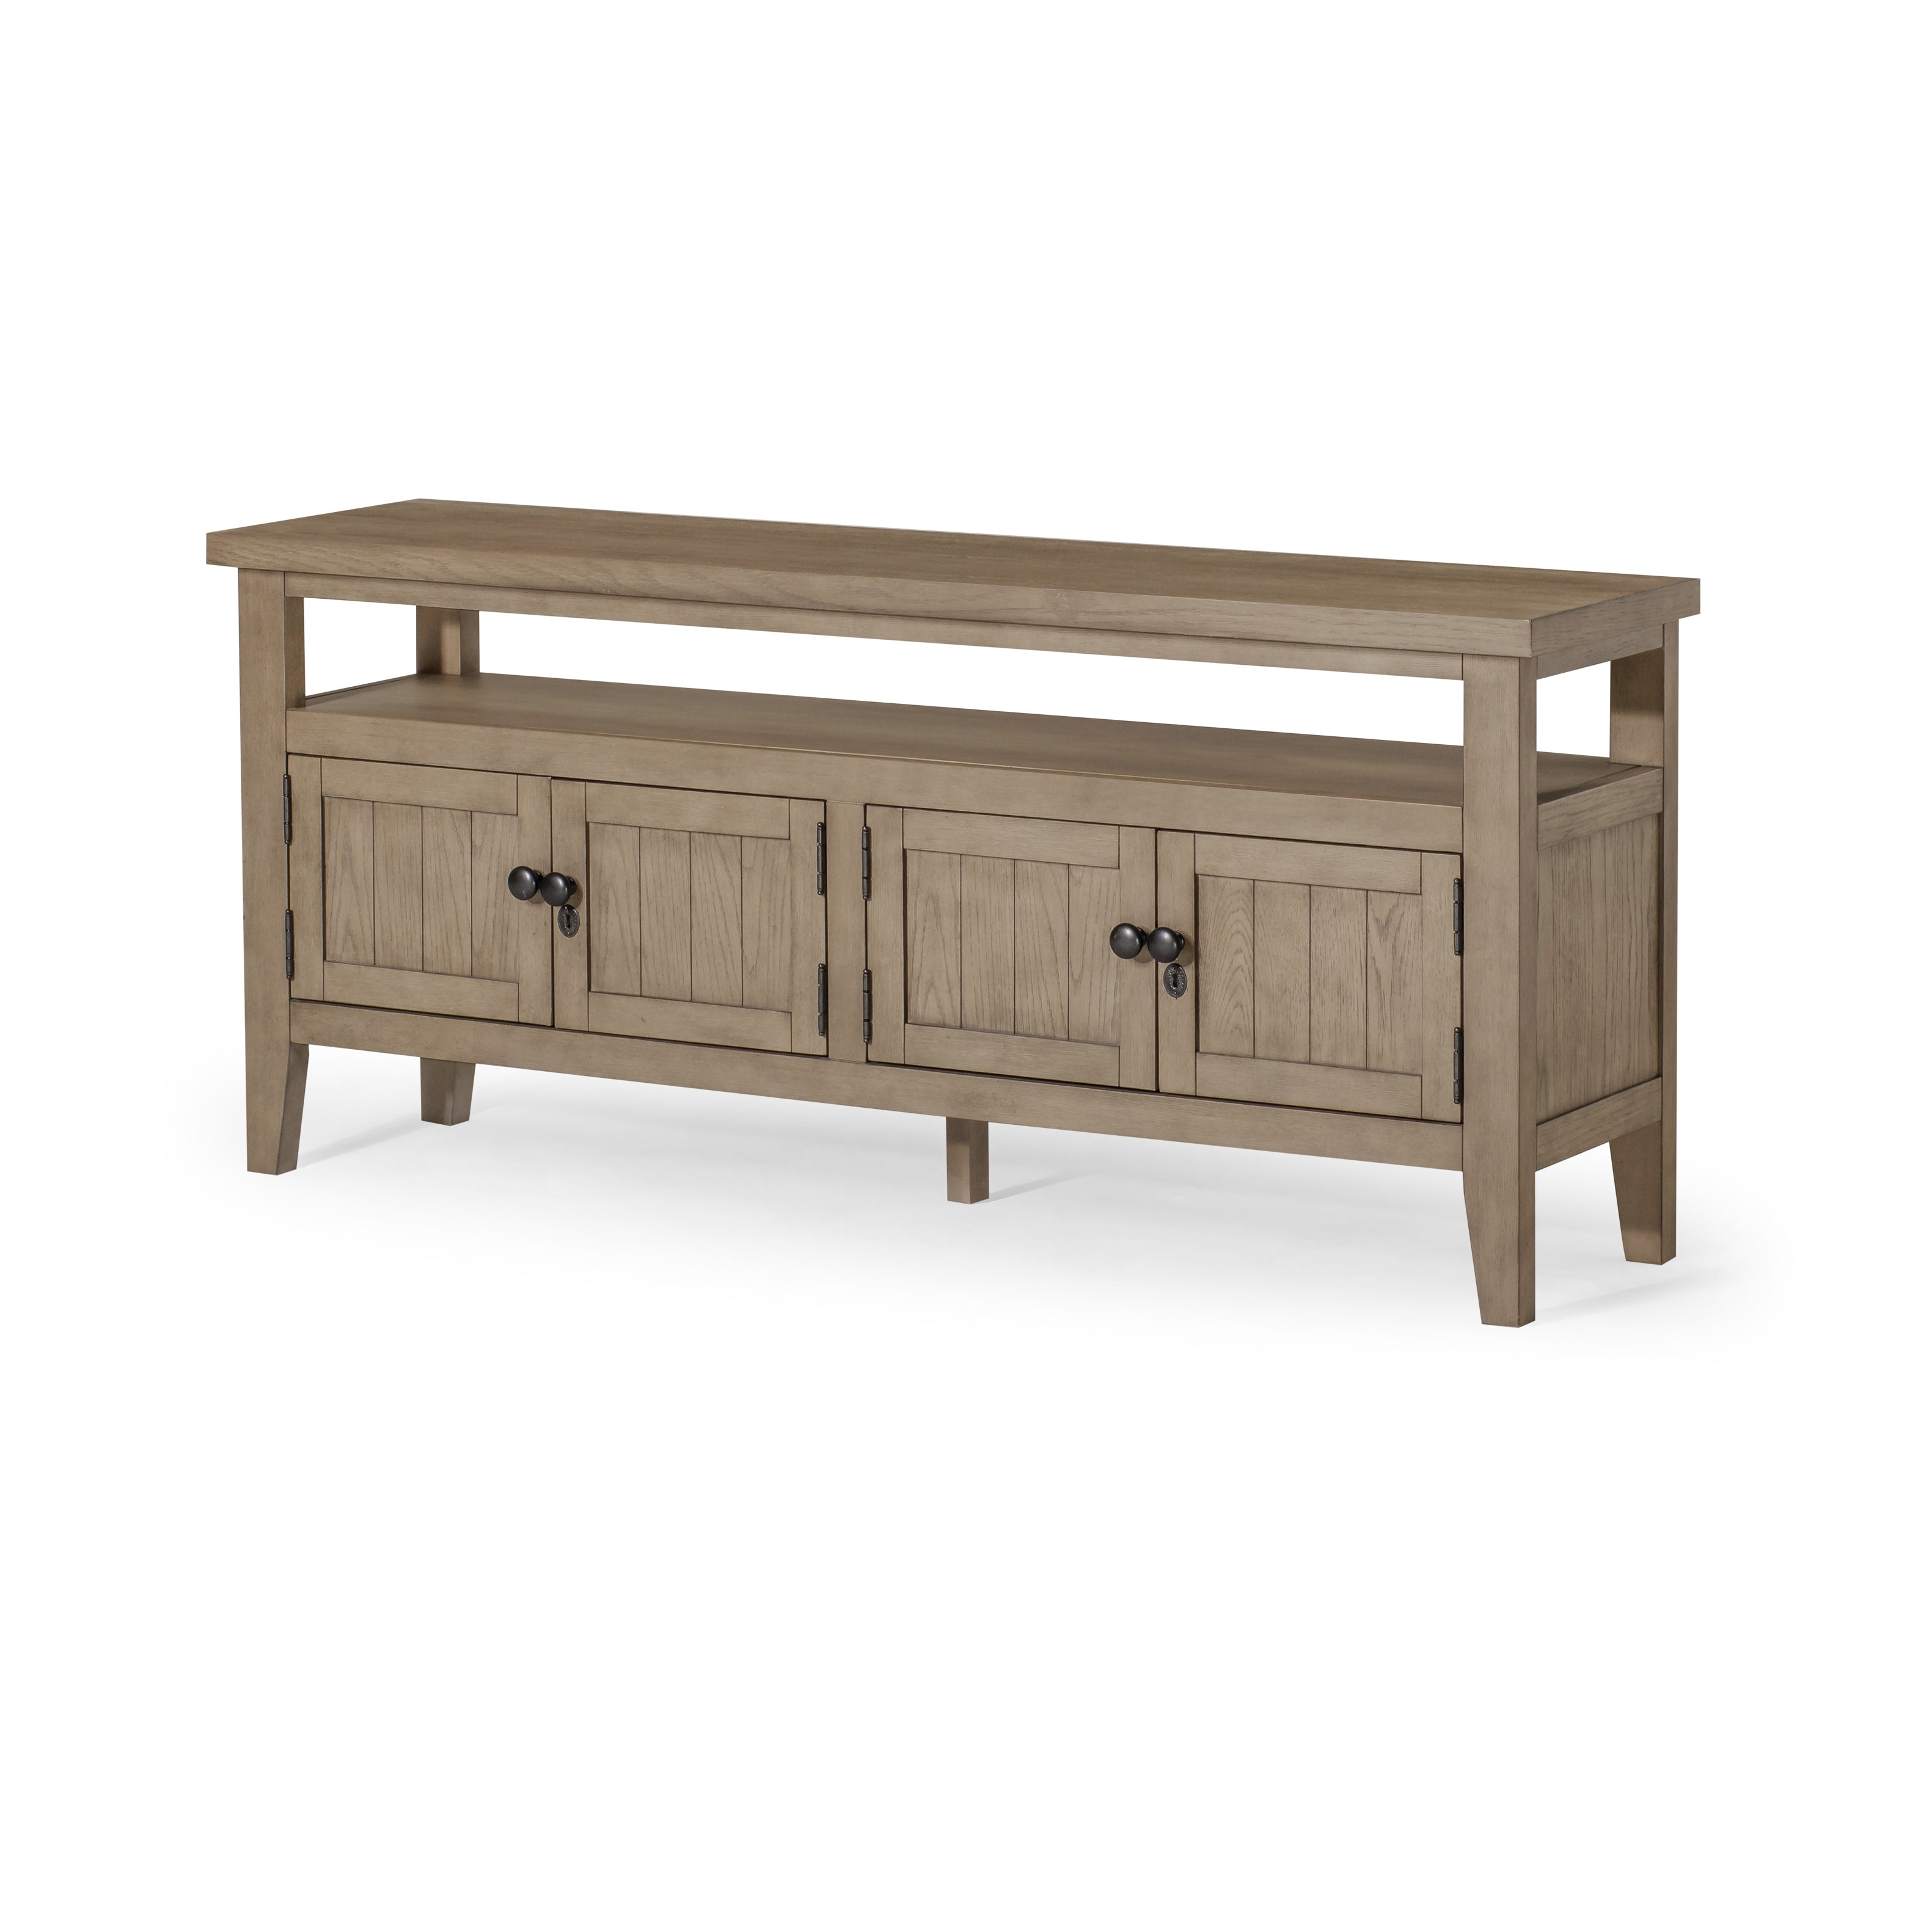 Turner Classical Wooden Media Unit in Antiqued Grey Finish in Media Units by Maven Lane